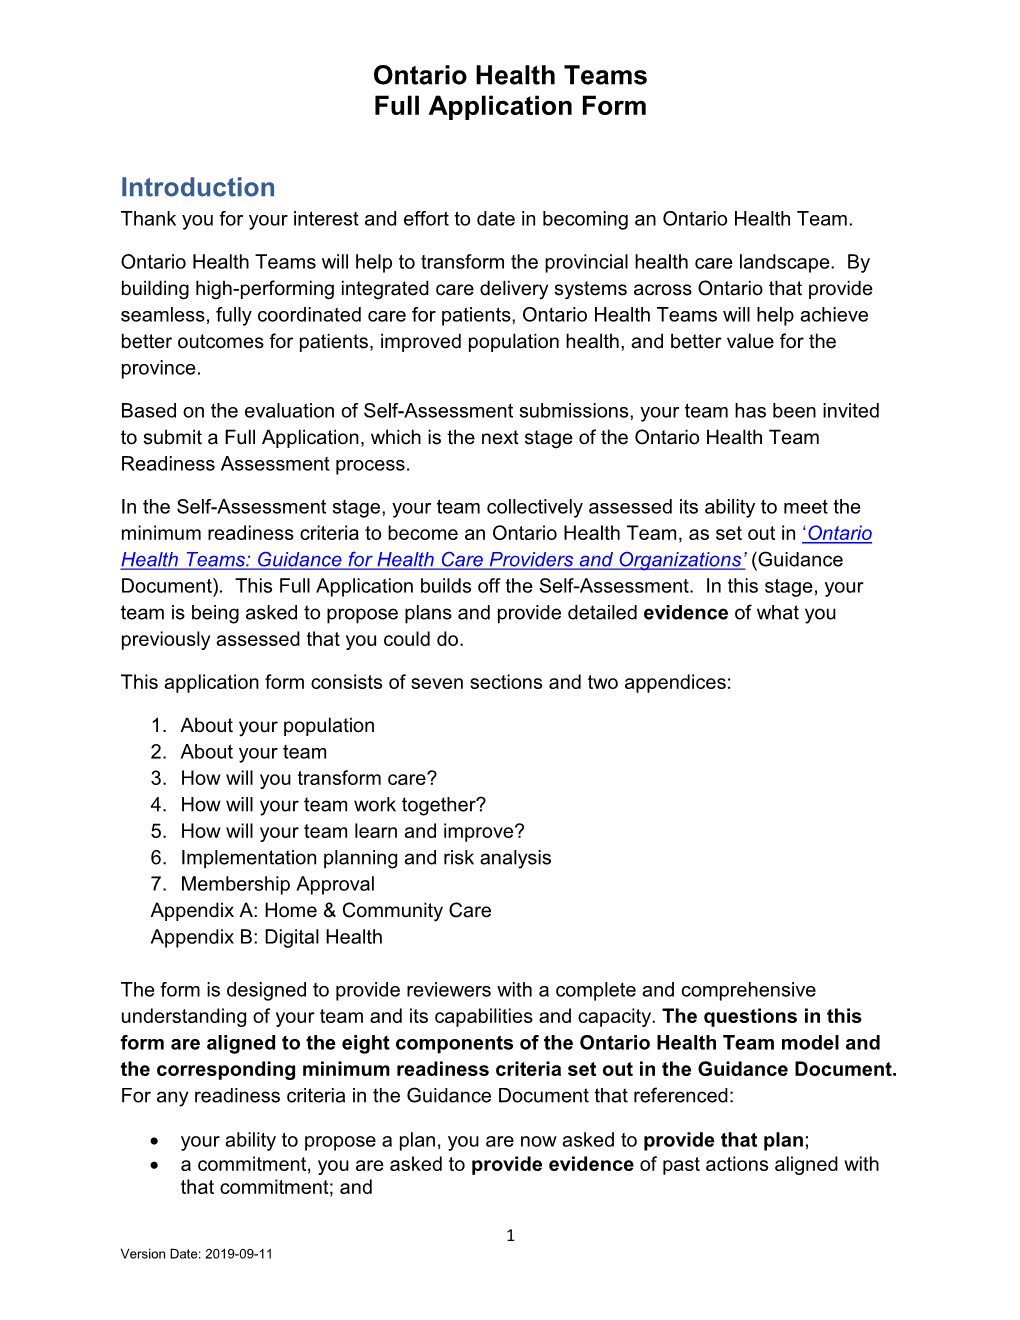 Ontario Health Teams Full Application Form Introduction